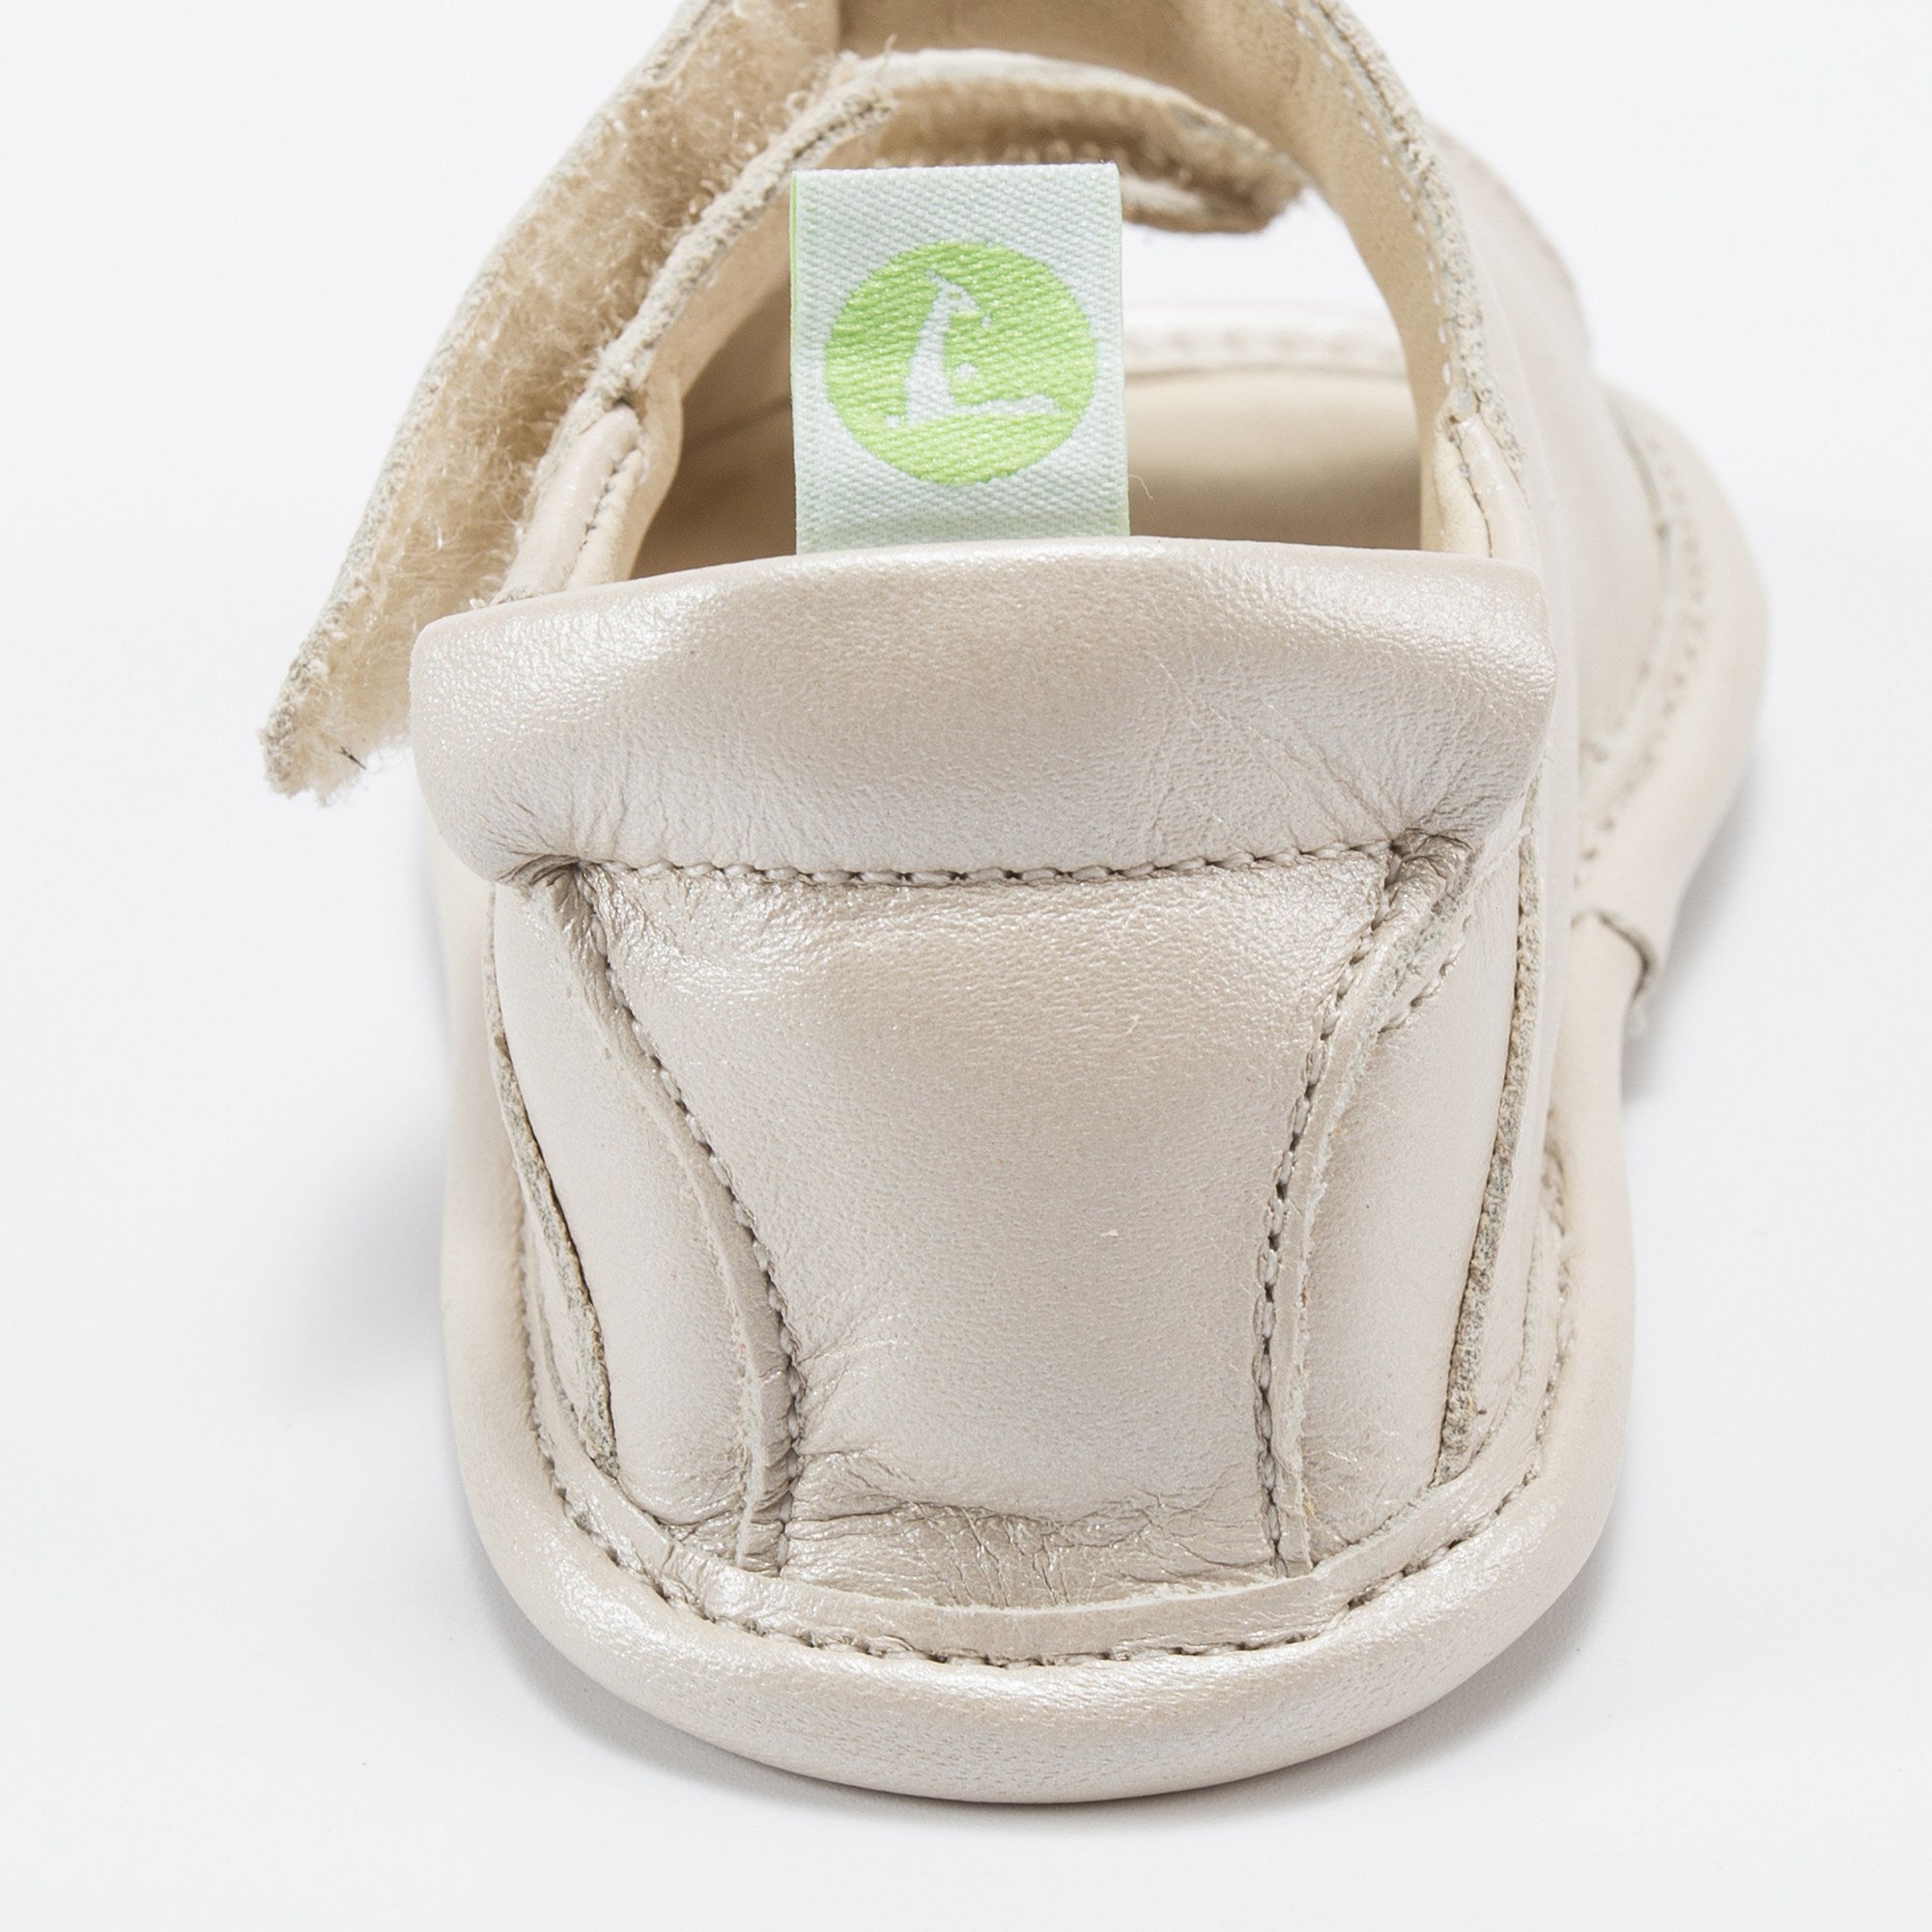 Baby Girls Antique White Leather Sandal